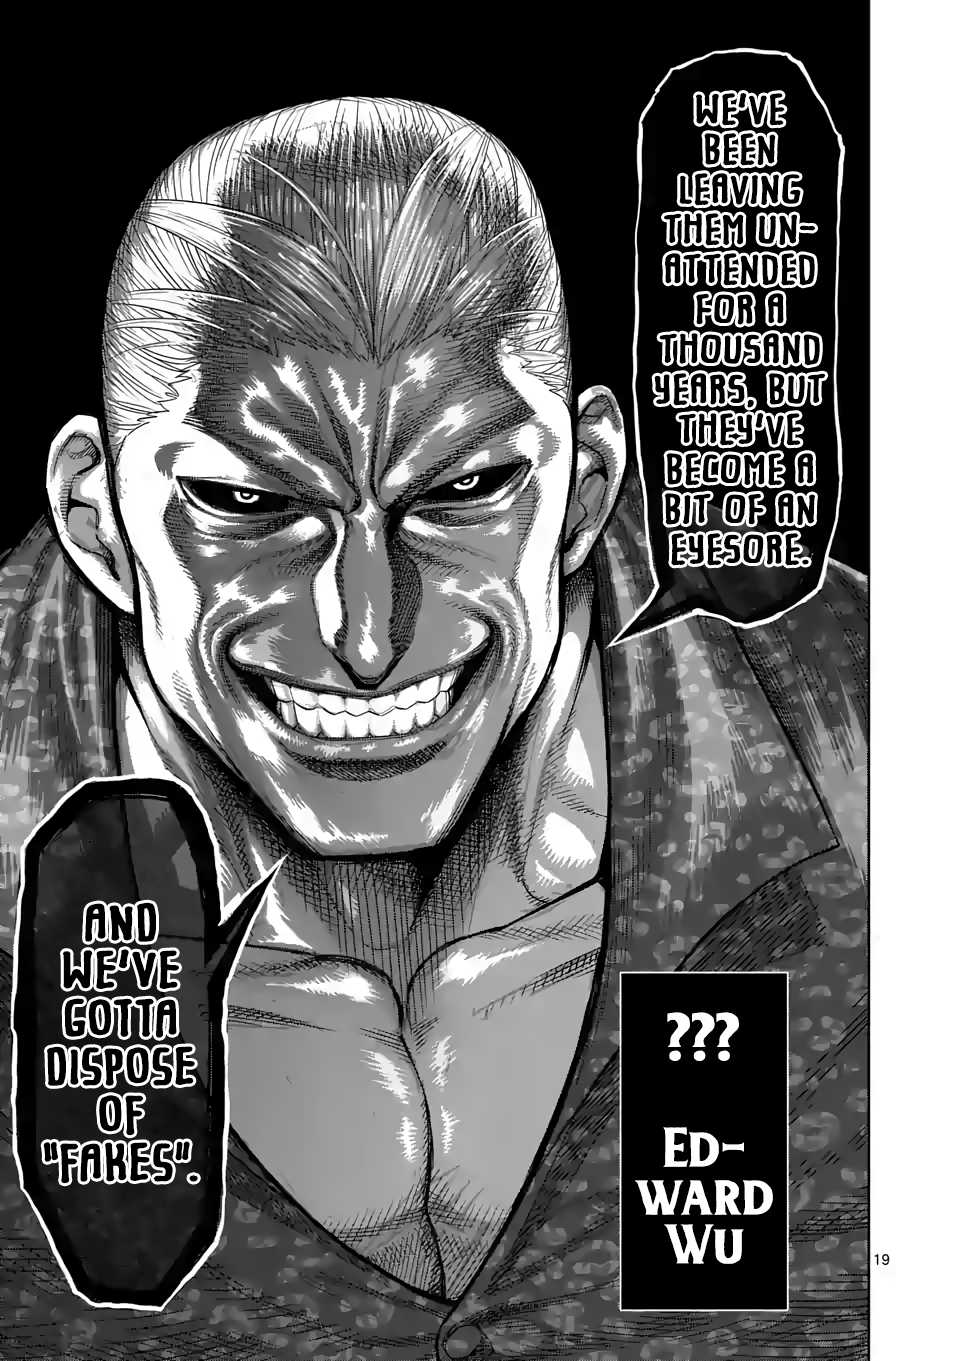 Kengan Omega, Chapter 13 Getting Going image 19